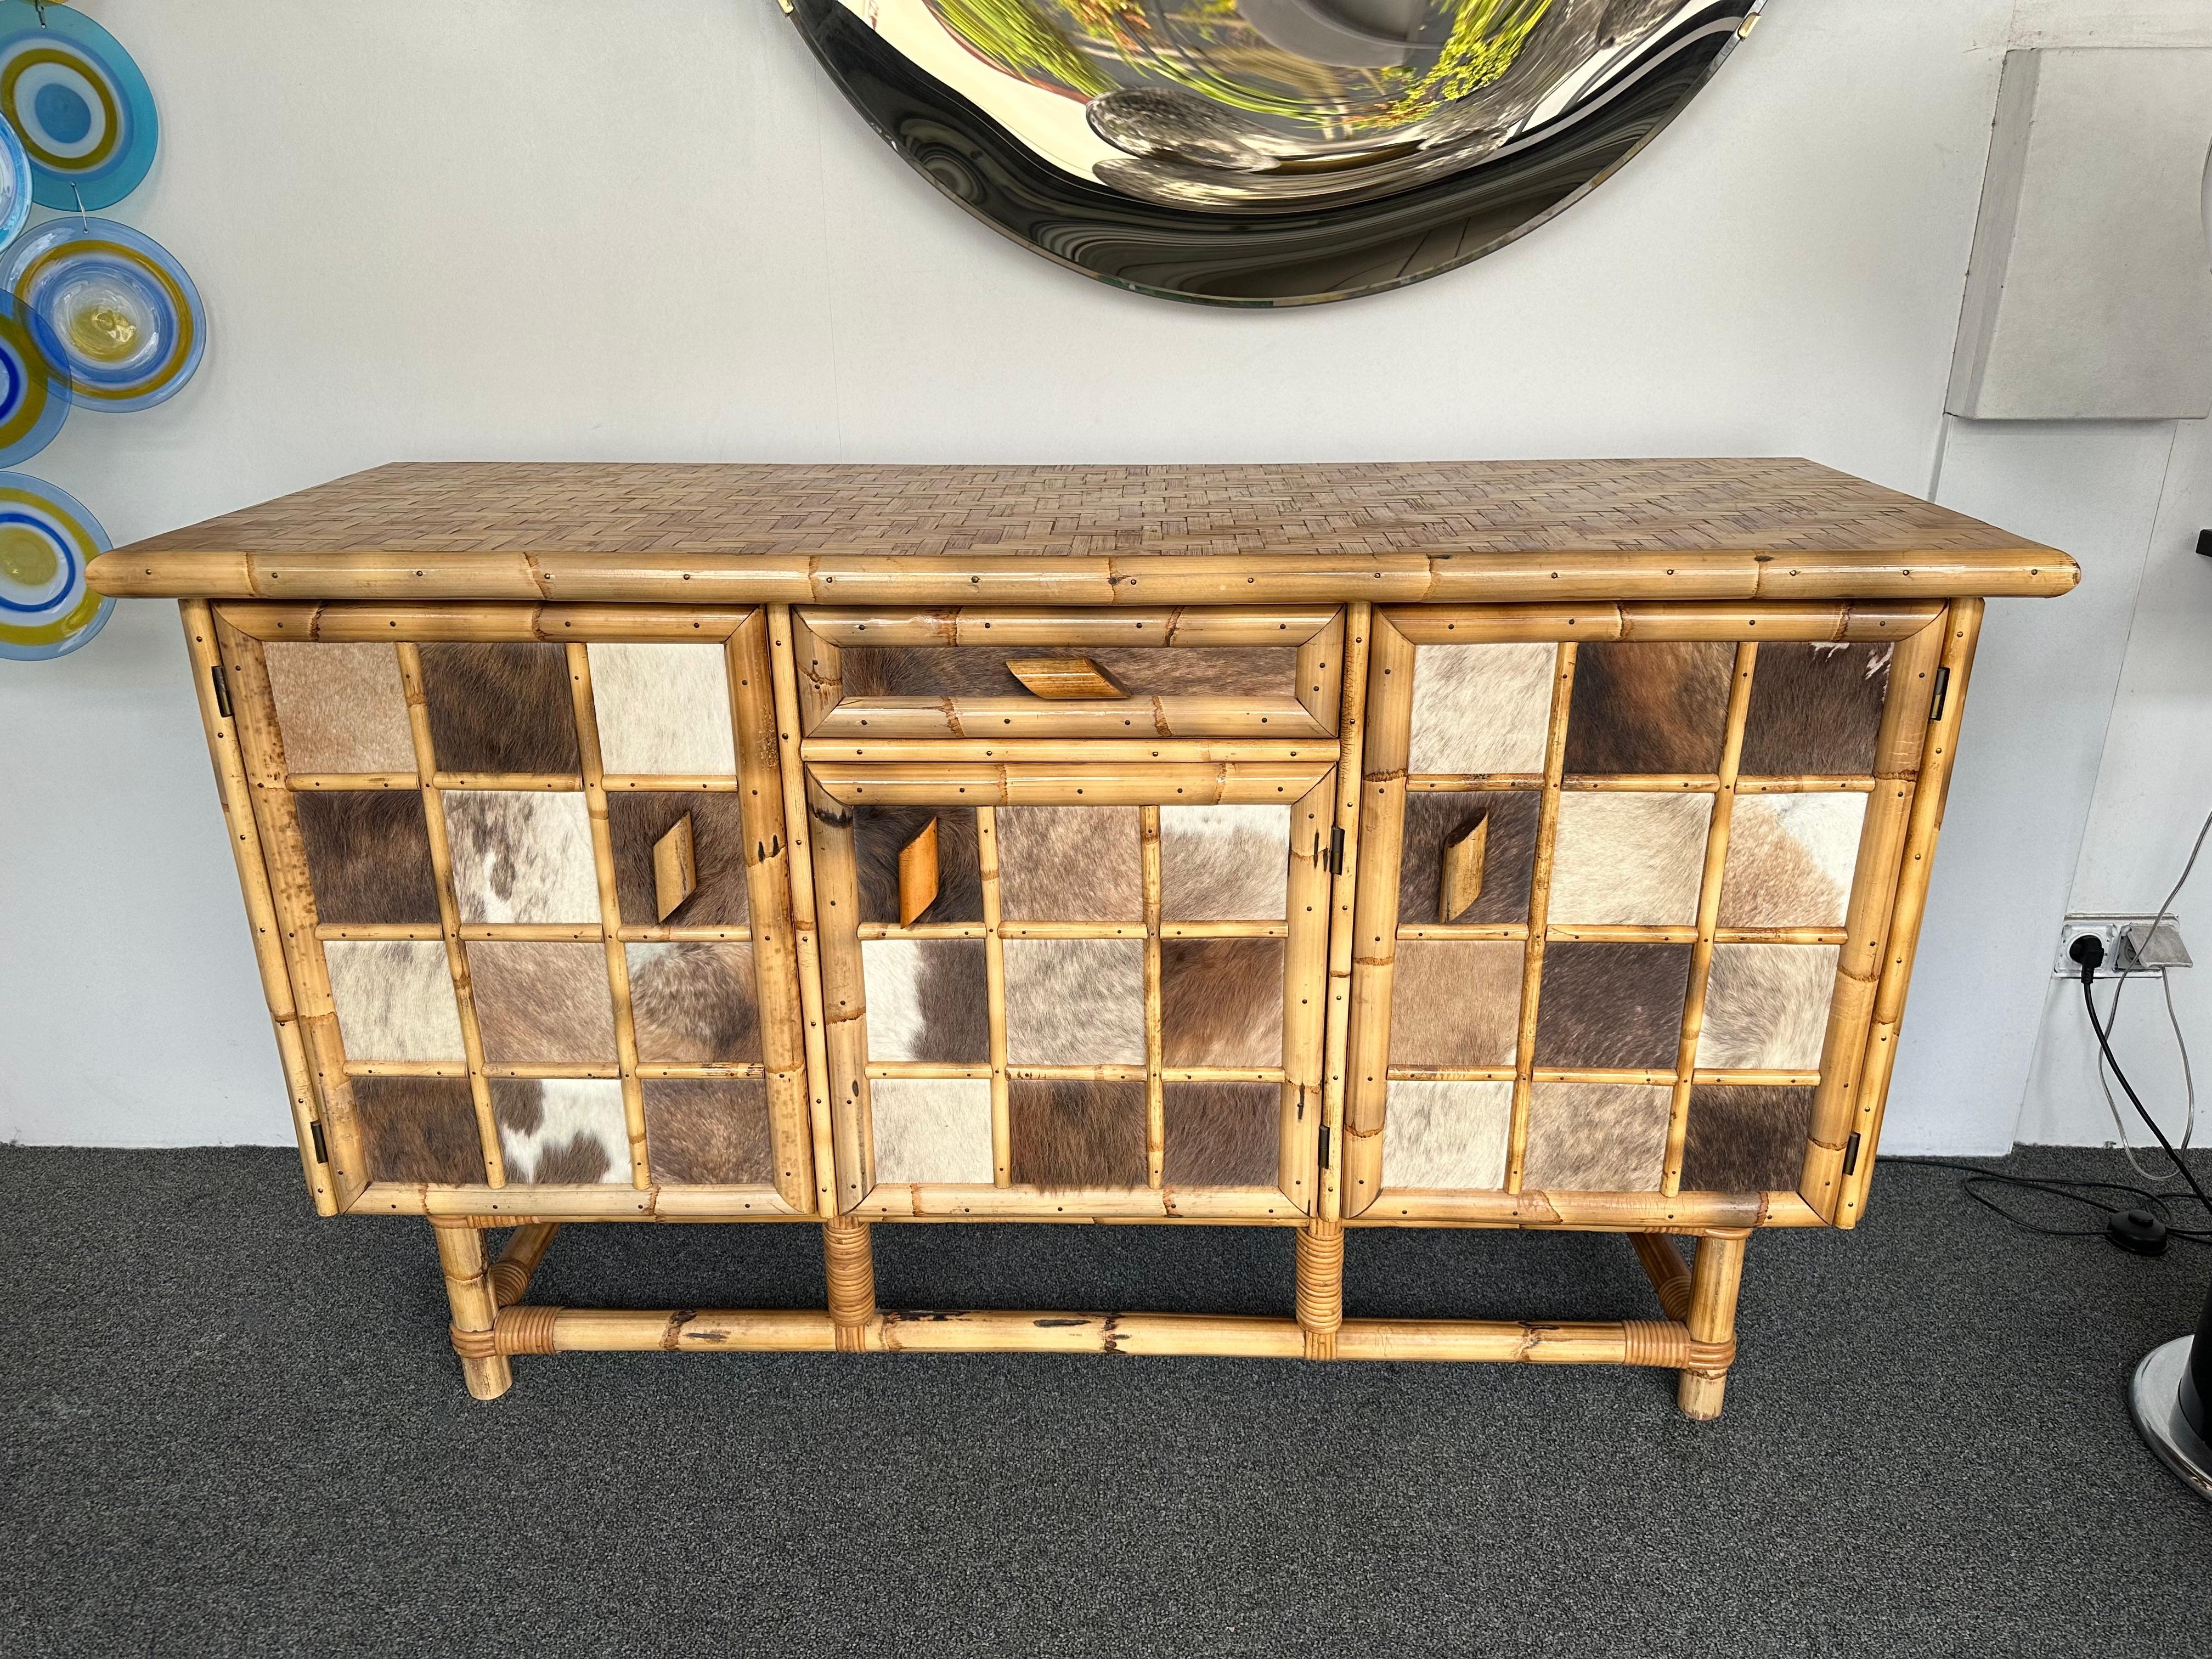 Mid-Century Modern Dry bar cabinet or buffet credenza in wood, bamboo, bamboo marquetry, doors decor with cow leather, glass shelf. Italian design attributed to the manufacture Dal Vera for the very typical marquetry top. Famous design like Mario